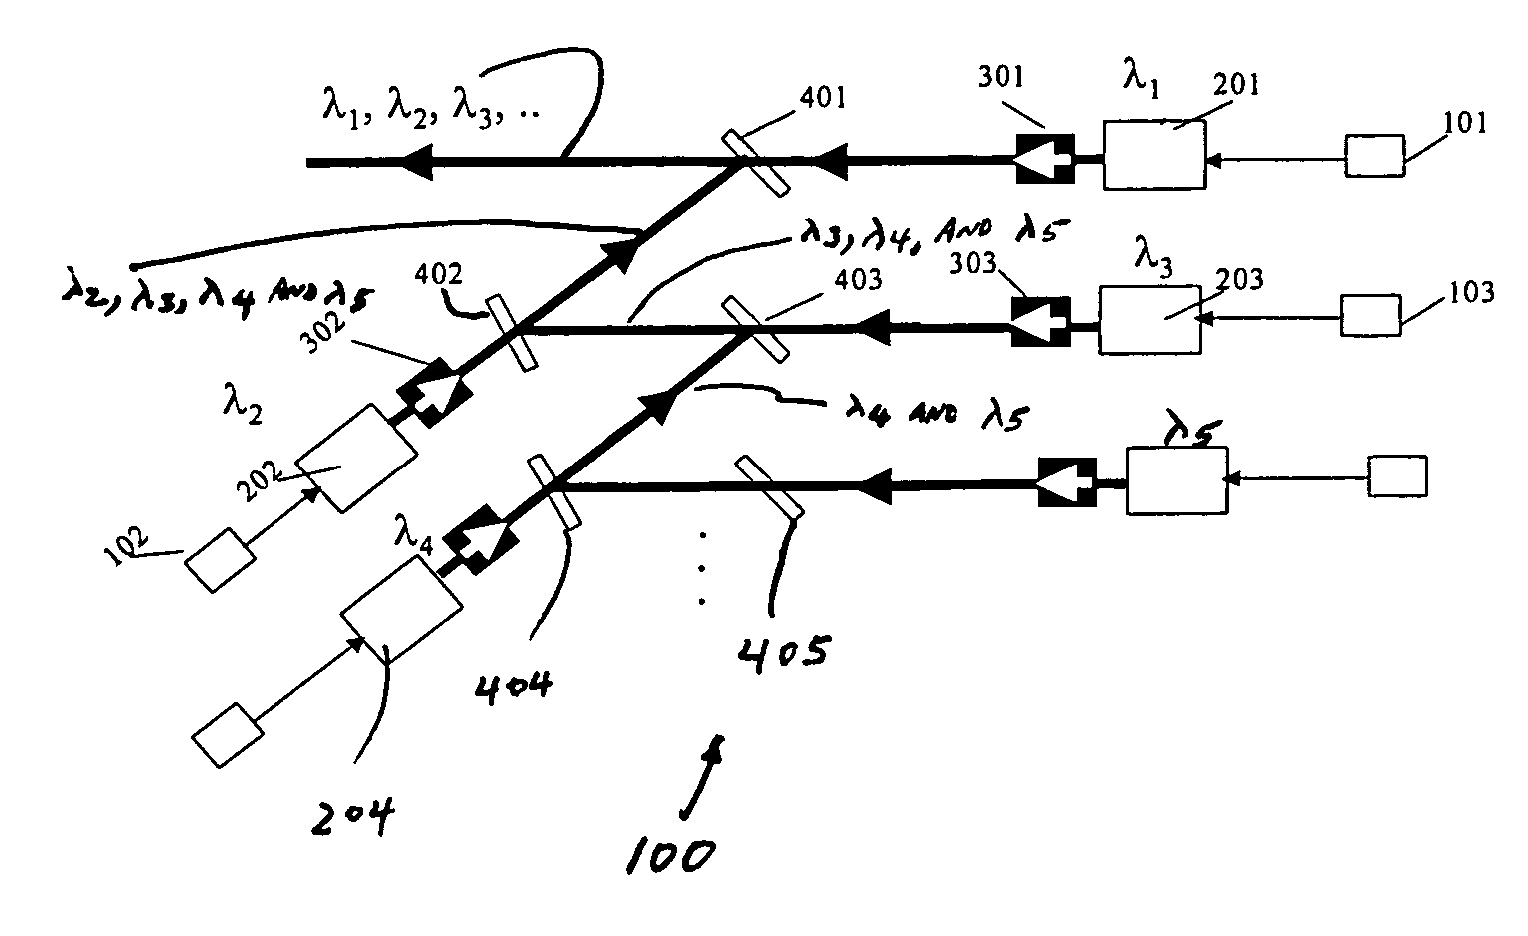 Wavelength division multiplexing source using multifunctional filters